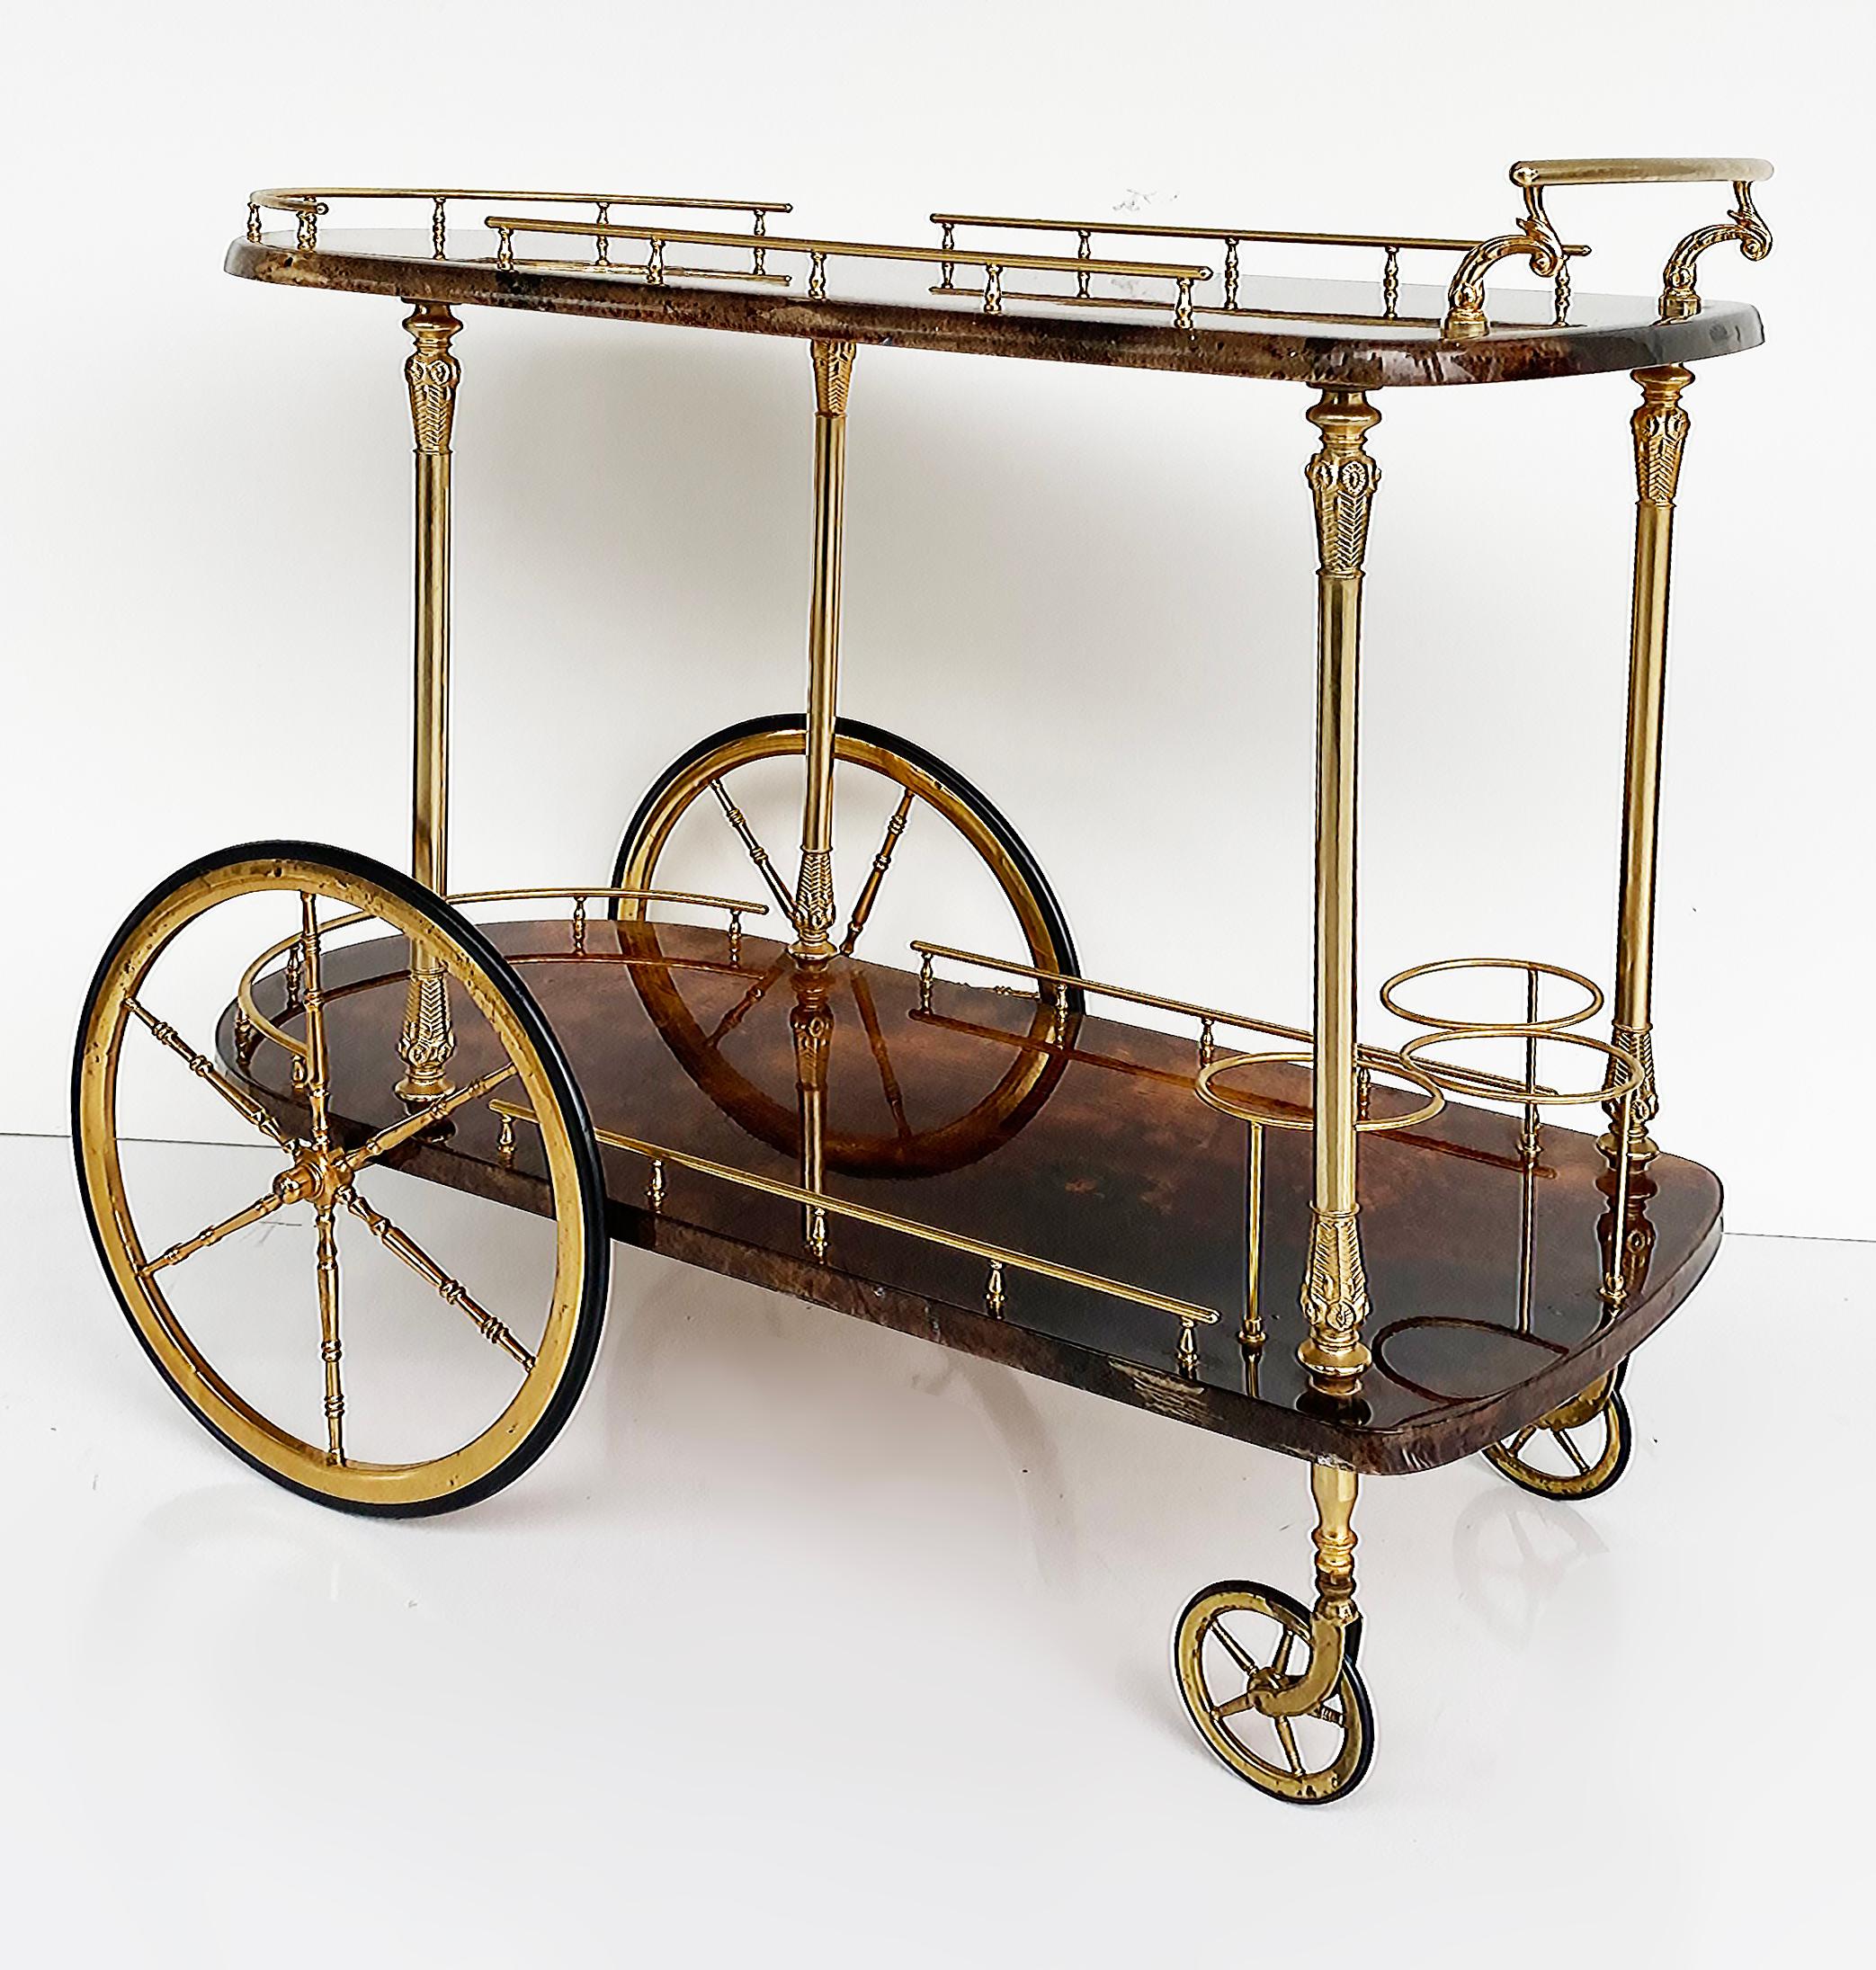 Aldo Tura Milano Italy Goatskin and Brass Bar/Tea Cart on Wheels circa  1960-70s

Offered for sale is a very recent acquisition from a Key Biscayne, FL estate of a socialite who passed away at the dear age of 104.  This wonderful Aldo Tura Milano